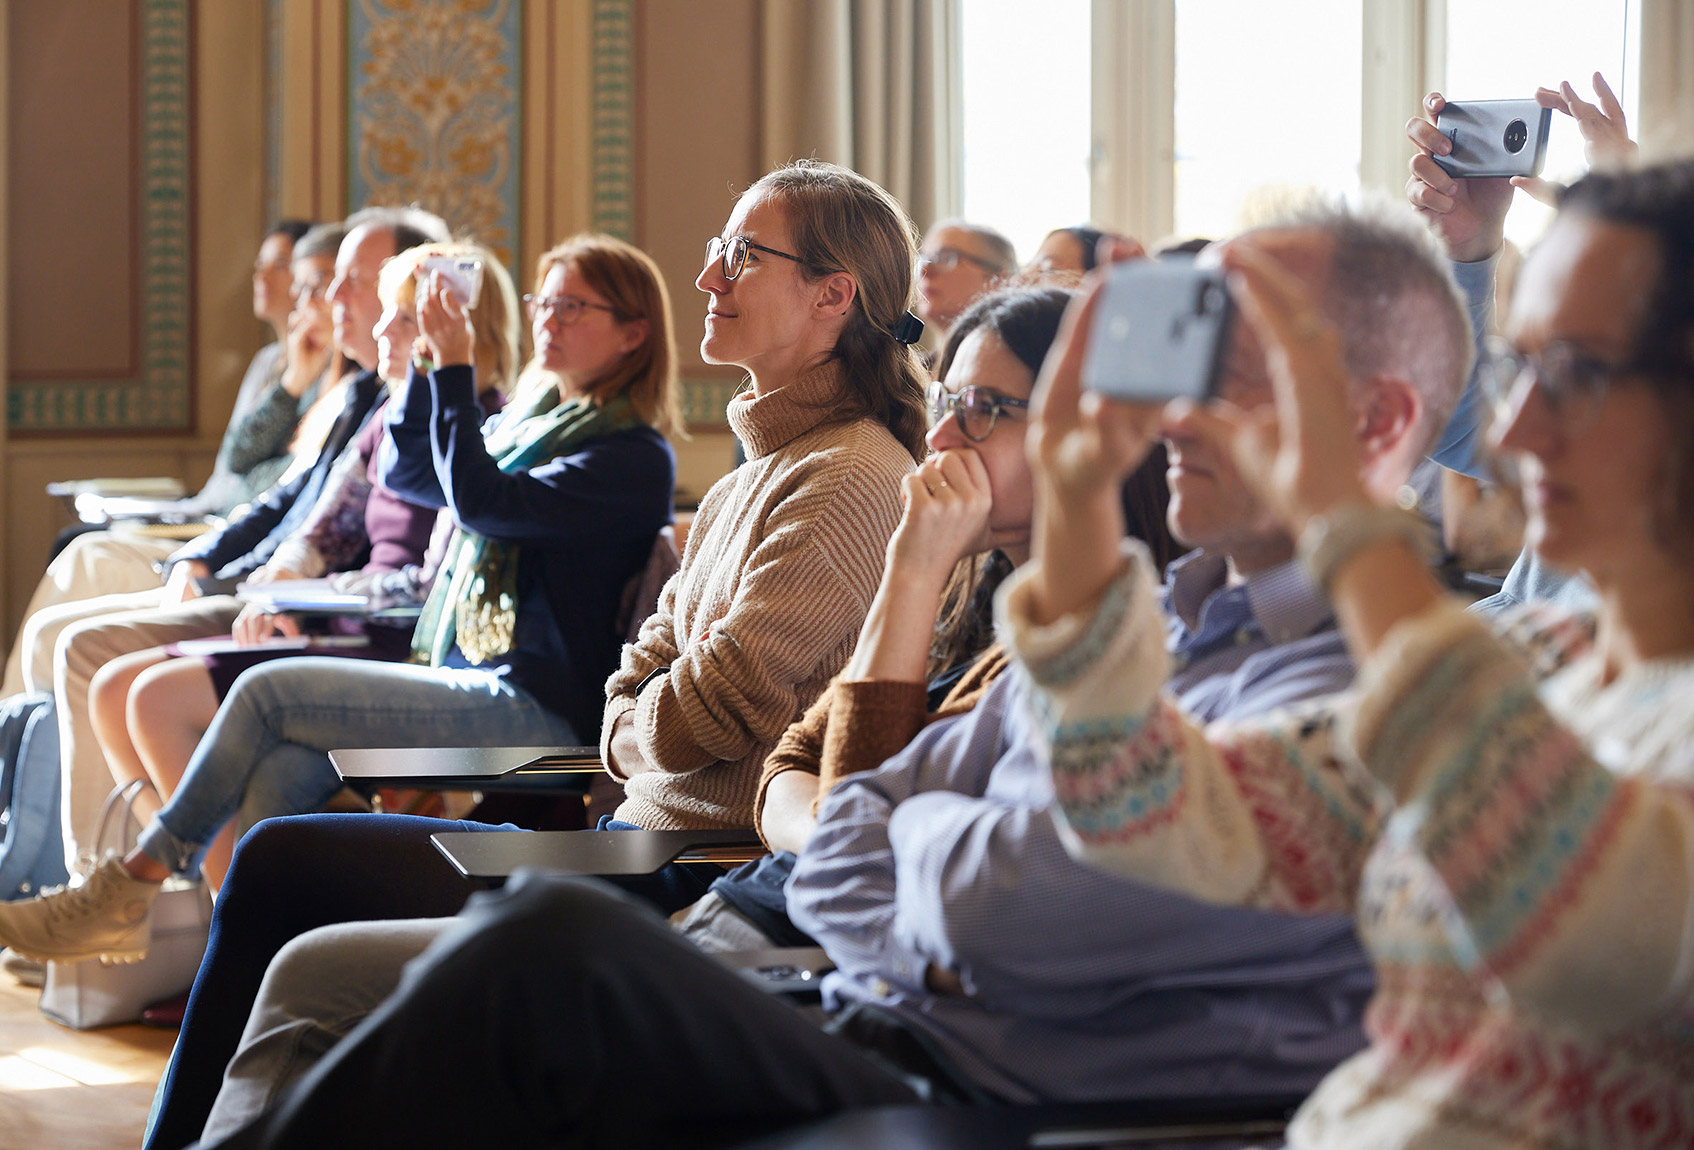 The audience at the keynote address “Teaching across disciplines” by Dr. Lucy Wenting from the University of Amsterdam.